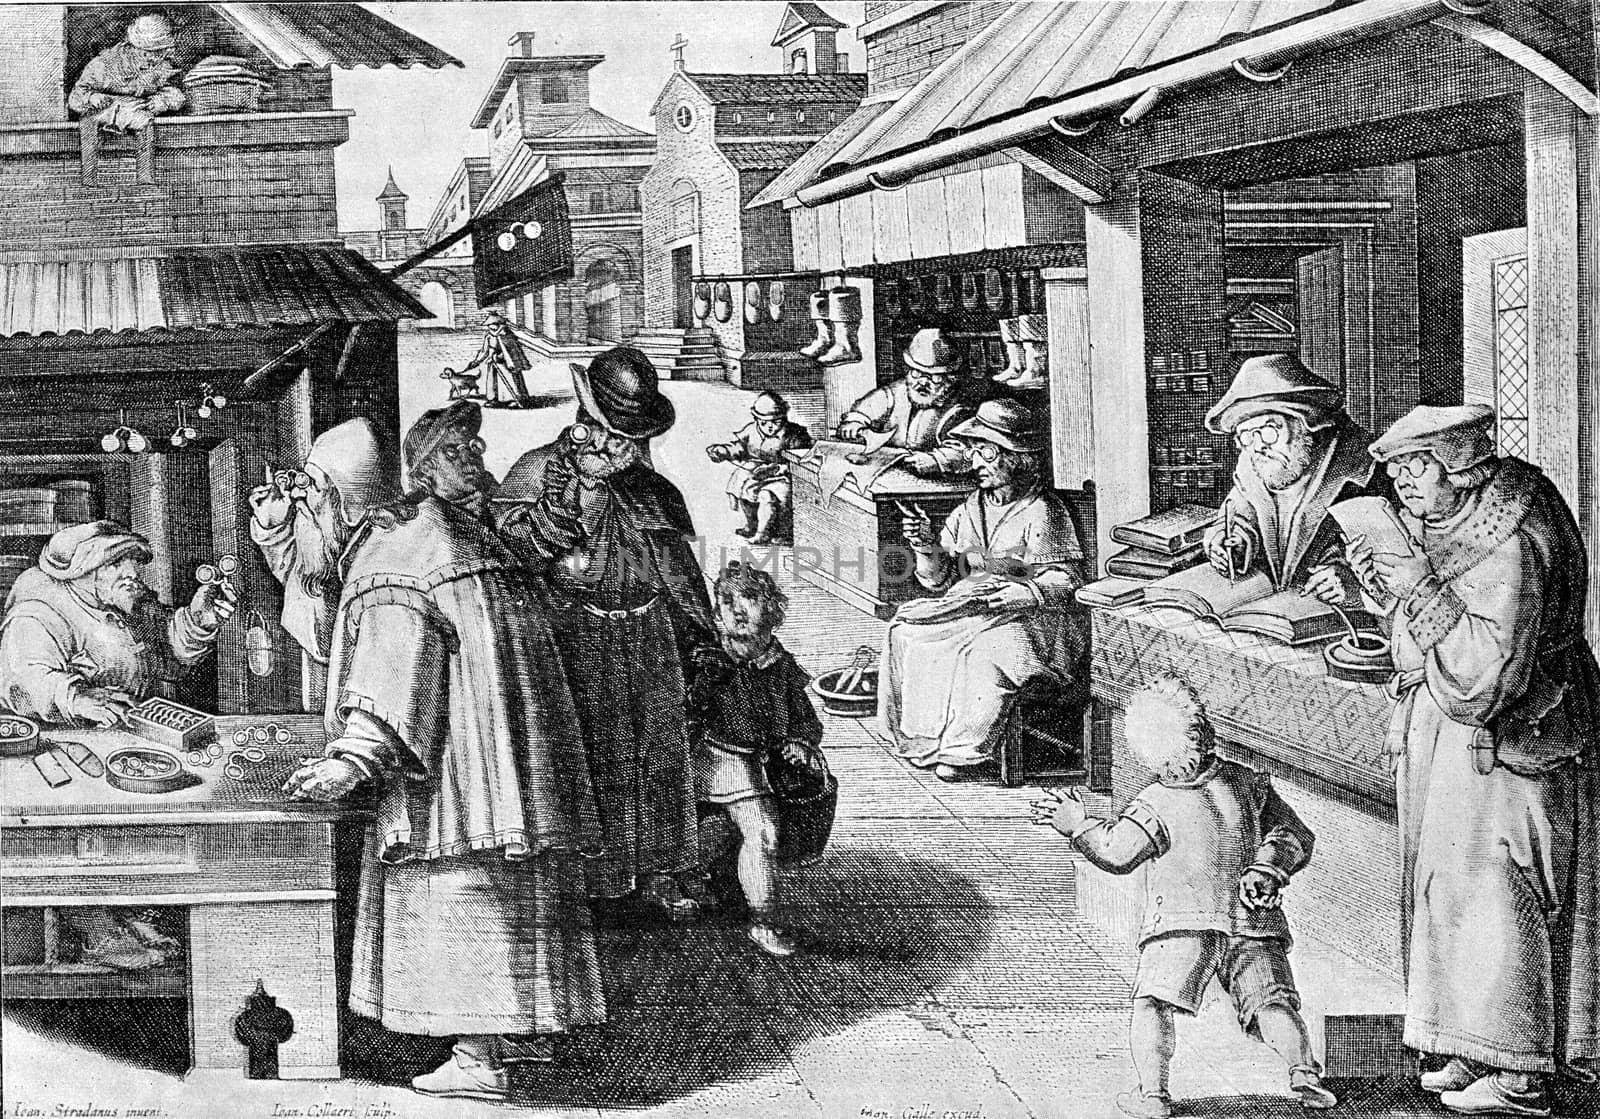 Manufacturers and spectacle wearers in the sixteenth century, vintage engraved illustration. From the Universe and Humanity, 1910.
